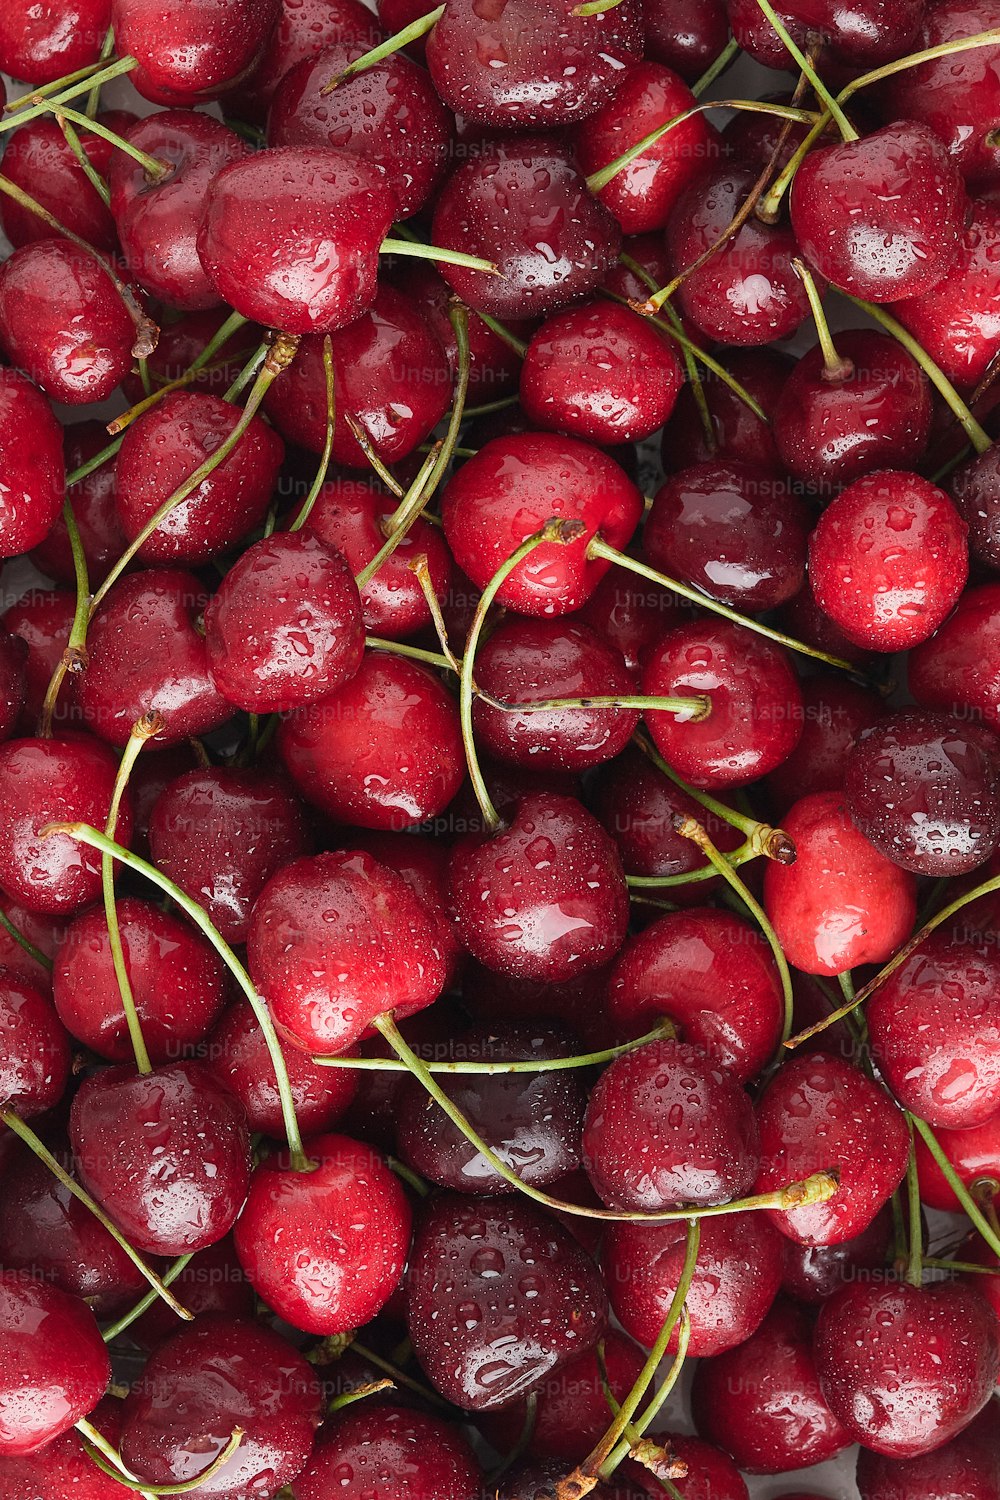 a pile of cherries with water droplets on them